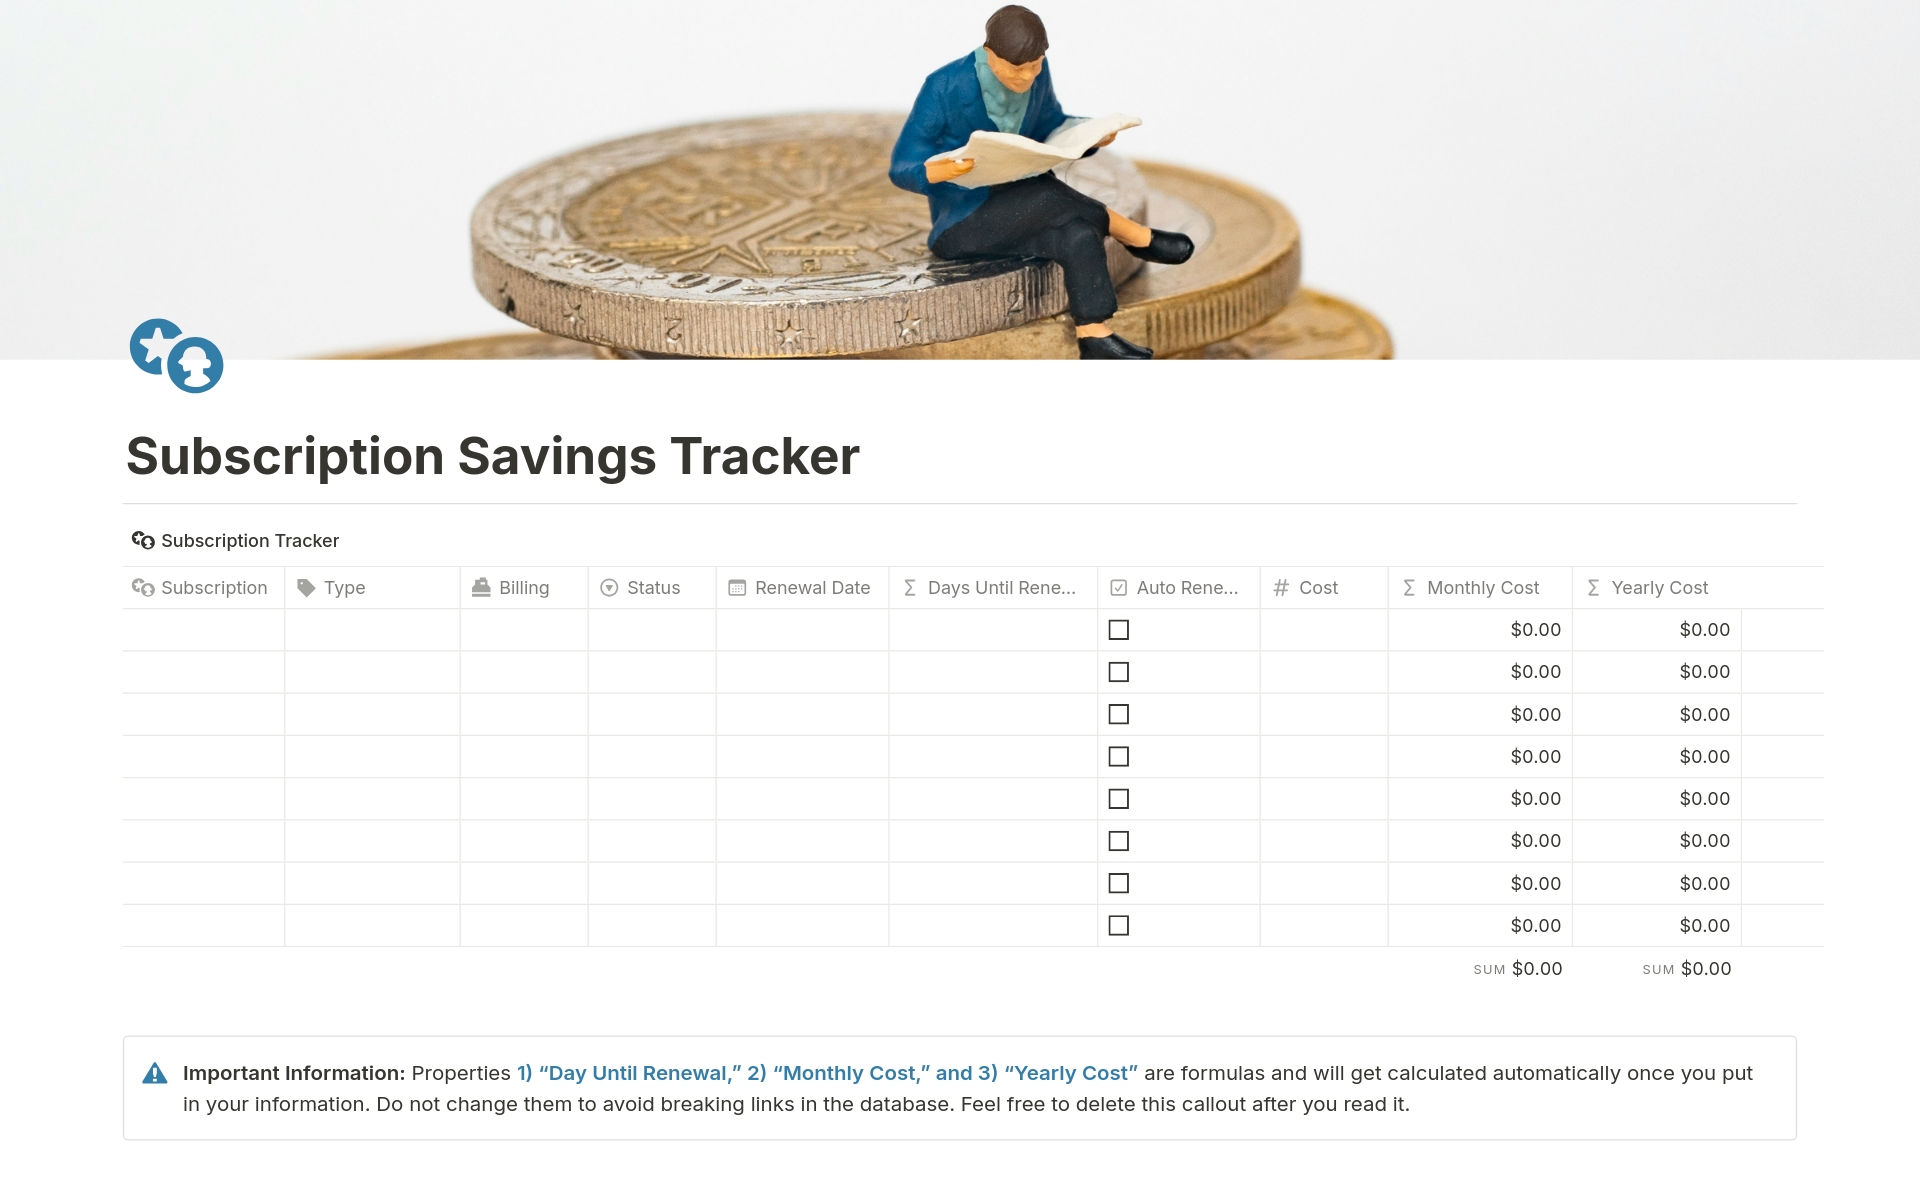 Stay on Top of Your Subscriptions with Ease. Tired of losing track of your subscriptions and surprise charges? Meet the Subscription Tracker in Notion—your all-in-one solution. Organize subscriptions, get renewal notifications, and manage costs effortlessly.